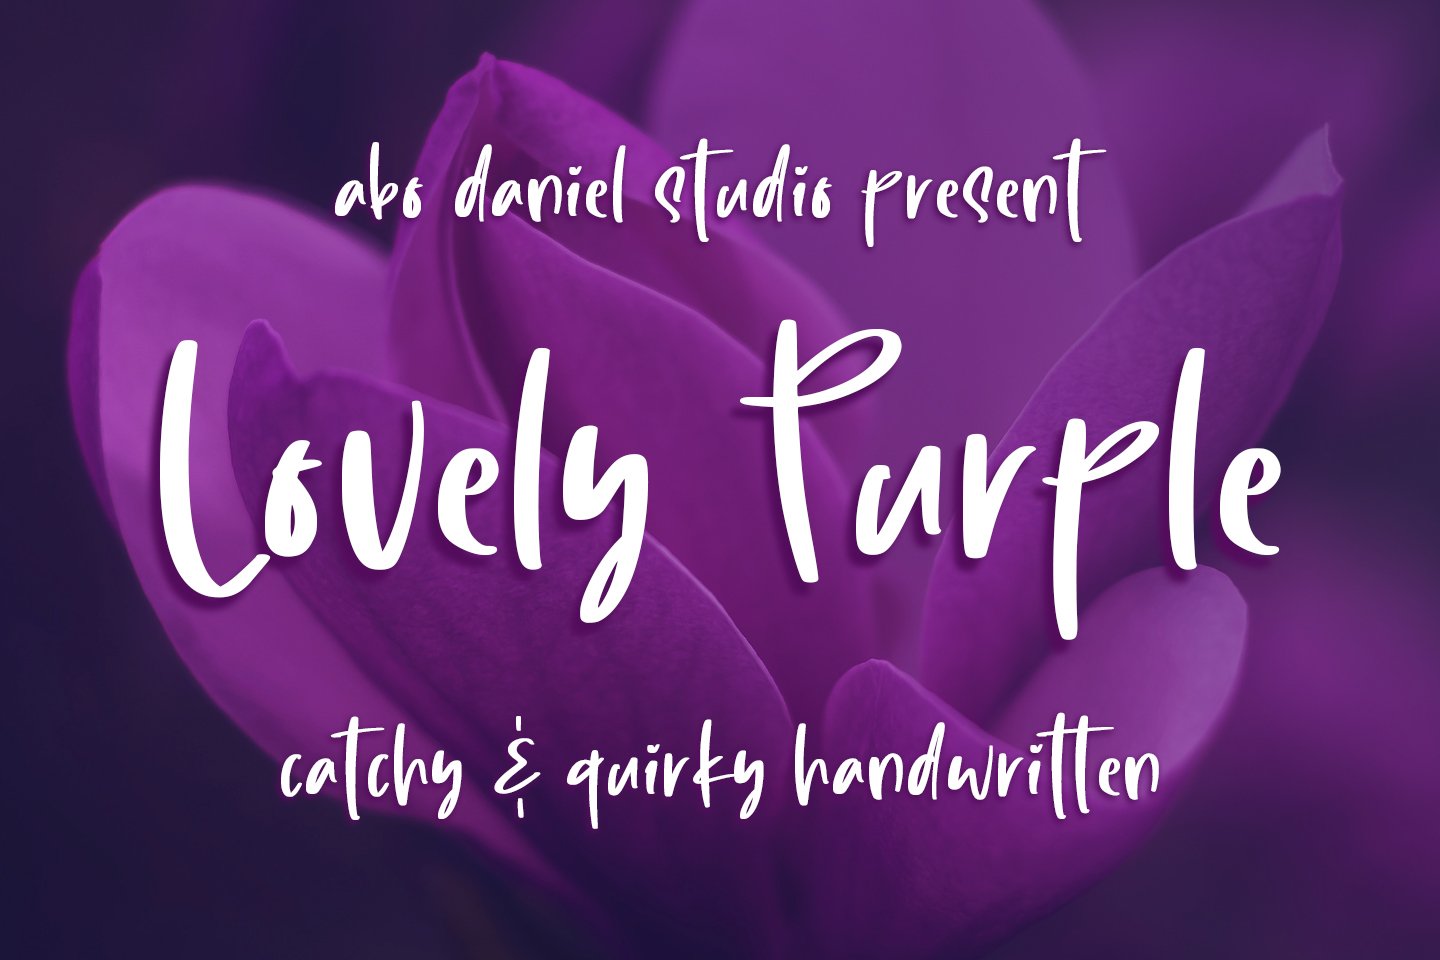 Lovely Purple cover image.